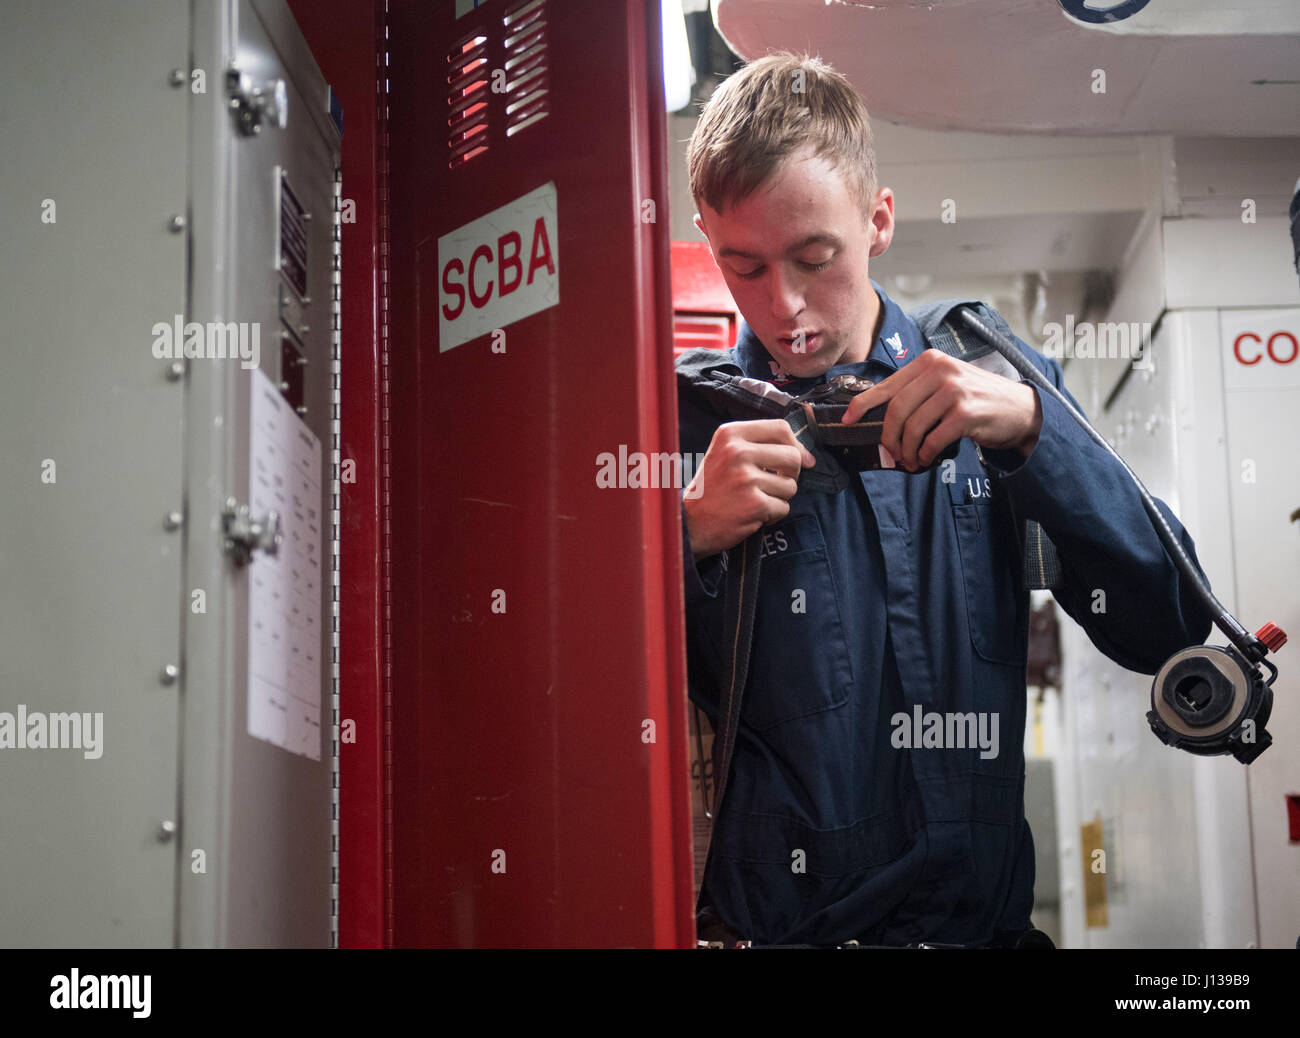 170410-N-PP996-004 SOUTH CHINA SEA (April 10, 2017) Gas Turbine System Technician (Mechanical) 3rd Class Jesse Maples, from San Simone, Arizona, dons a self contained breathing apparatus during a damage control drill aboard Arleigh Burke-class guided-missile destroyer USS Michael Murphy (DDG 112). Michael Murphy is on a regularly scheduled Western Pacific deployment with the Carl Vinson Carrier Strike Group as part of the U.S. Pacific Fleet-led initiative to extend the command and control functions of U.S. 3rd Fleet. U.S. Navy aircraft carrier strike groups have patrolled the Indo-Asia-Pacific Stock Photo